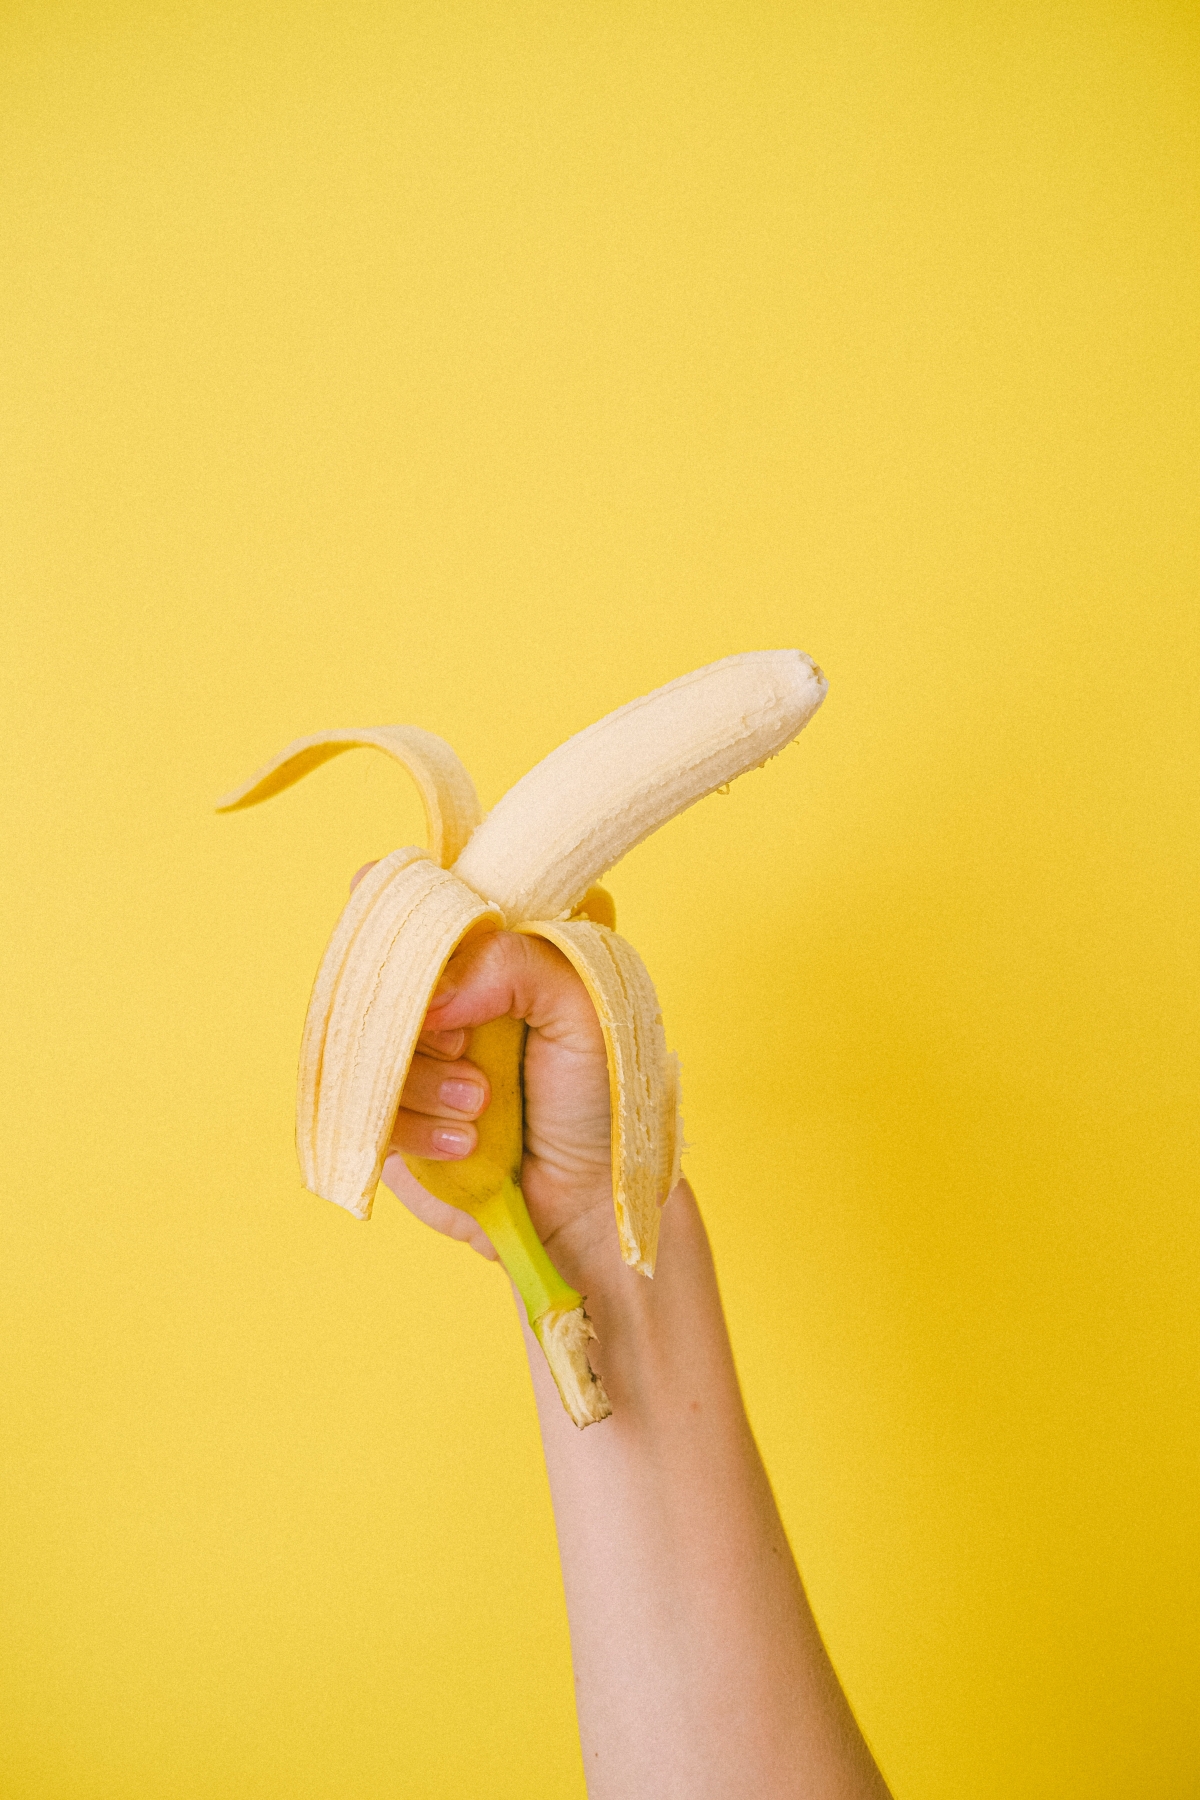 5 Surprising Ways to Use Banana Peels in Your Beauty Routine